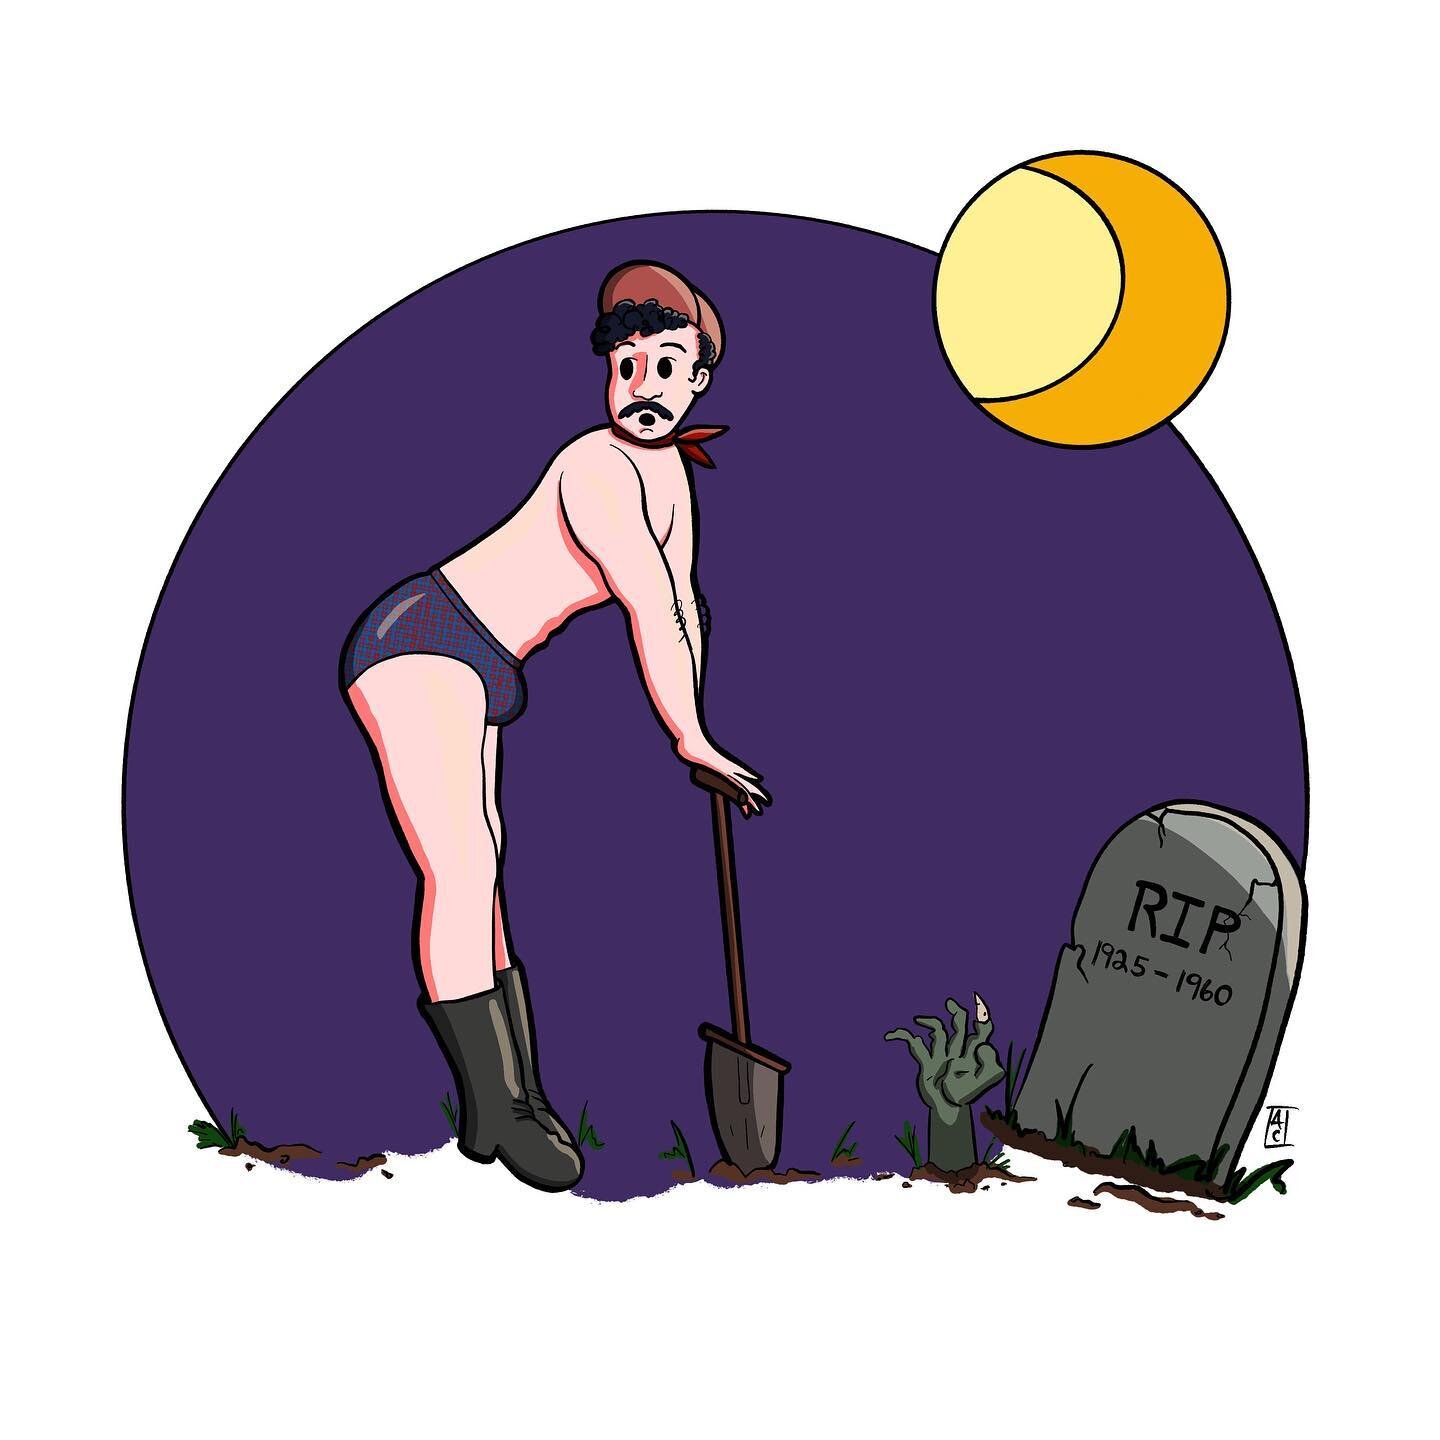 Been busy. Forgot to post my #pintober the other day. Here&rsquo;s my illustration for the &ldquo;Coffin&rdquo; prompt.
@caducadoart 
.
#malepinup #spoopyseason #coffin #gravedigger #makeitsexy #pinup #illustration